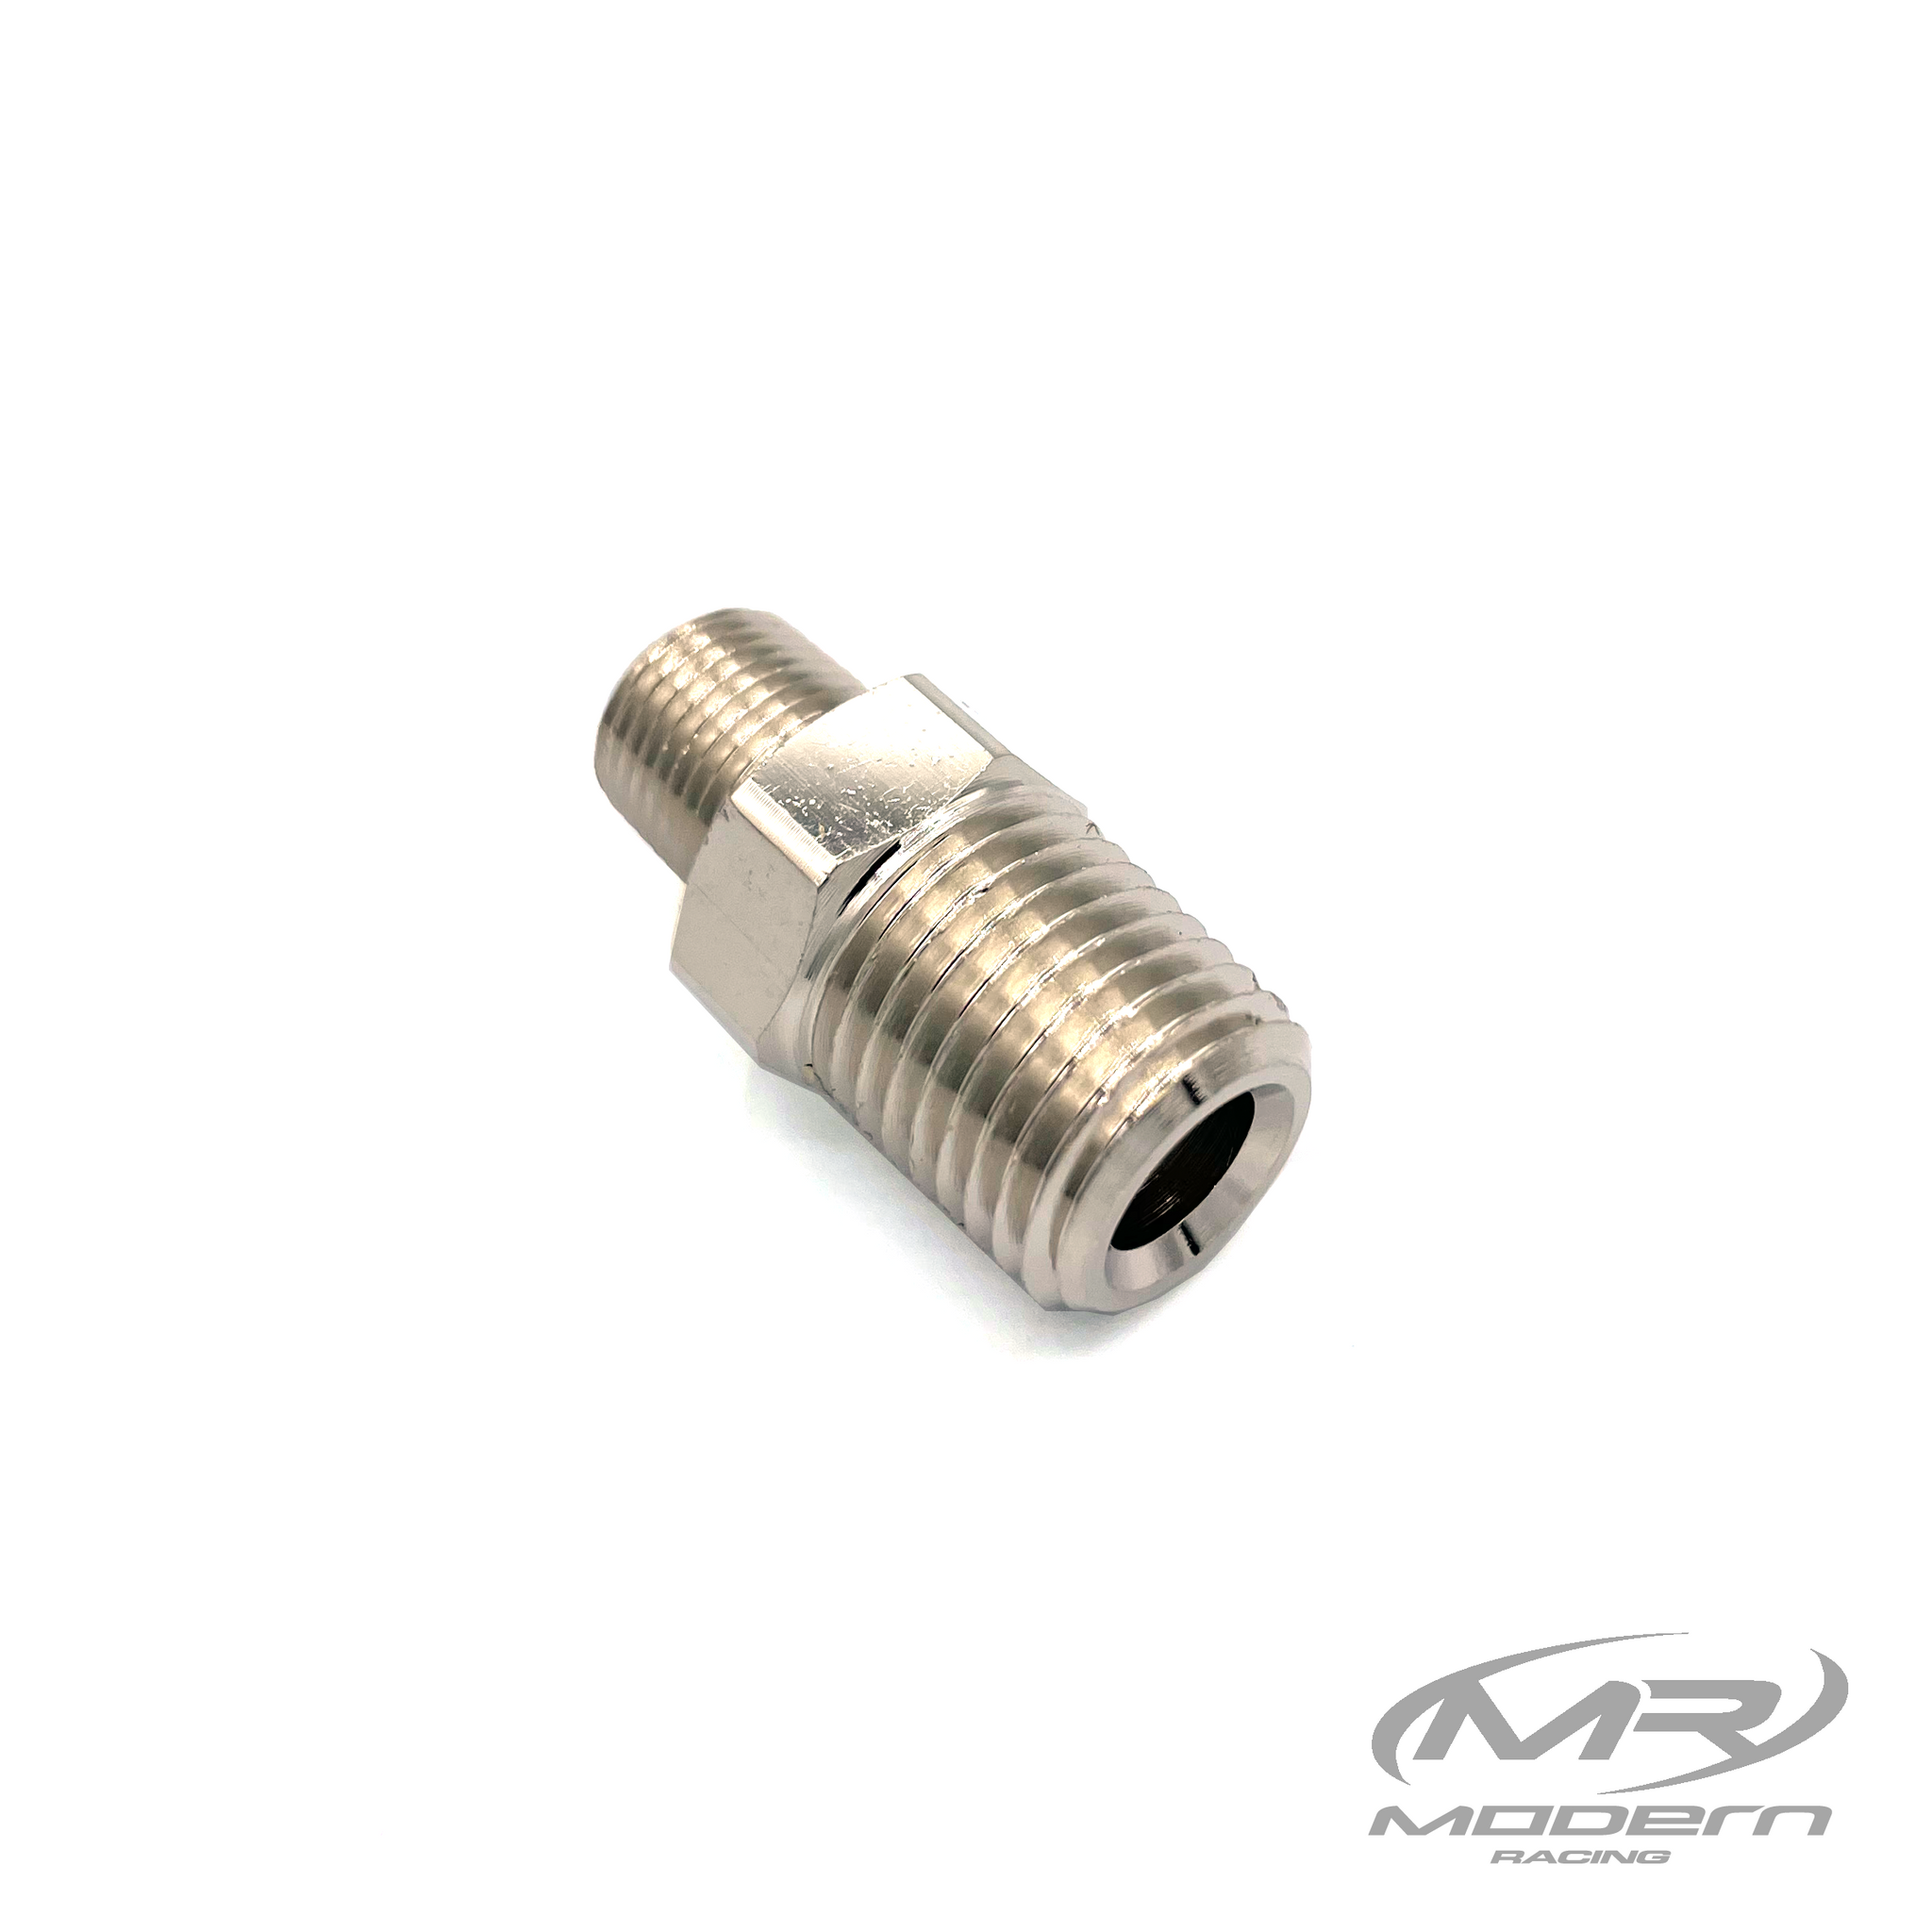 1/8" NPT Male To 1/4" NPT Male Straight Adapter Fitting Brass (Nickel Plated)